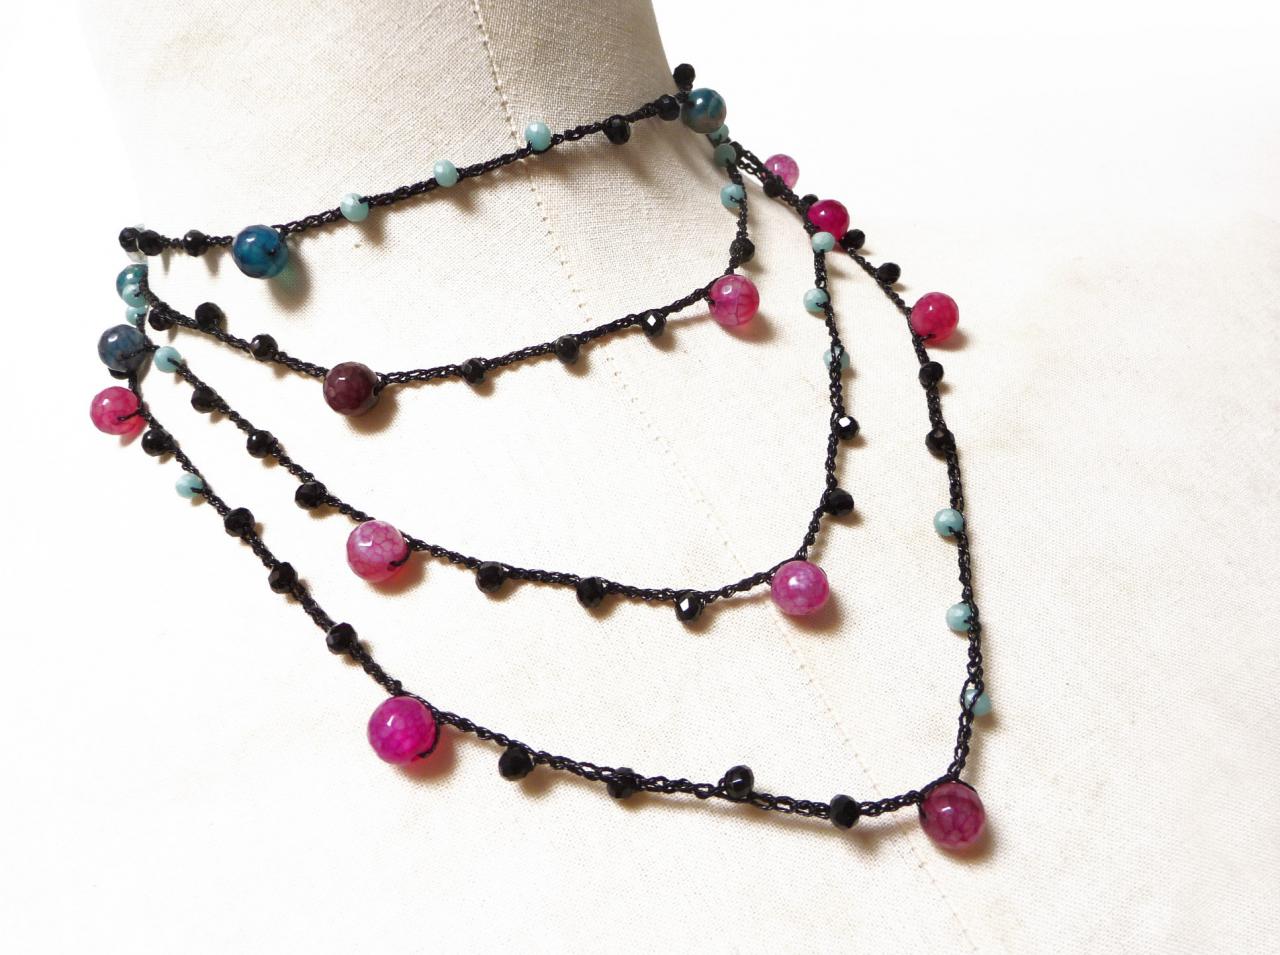 Black Long Beaded Necklace With Pink And Green Semi Precious Beads And Tiny Crystals, Crochet Rosary Necklace